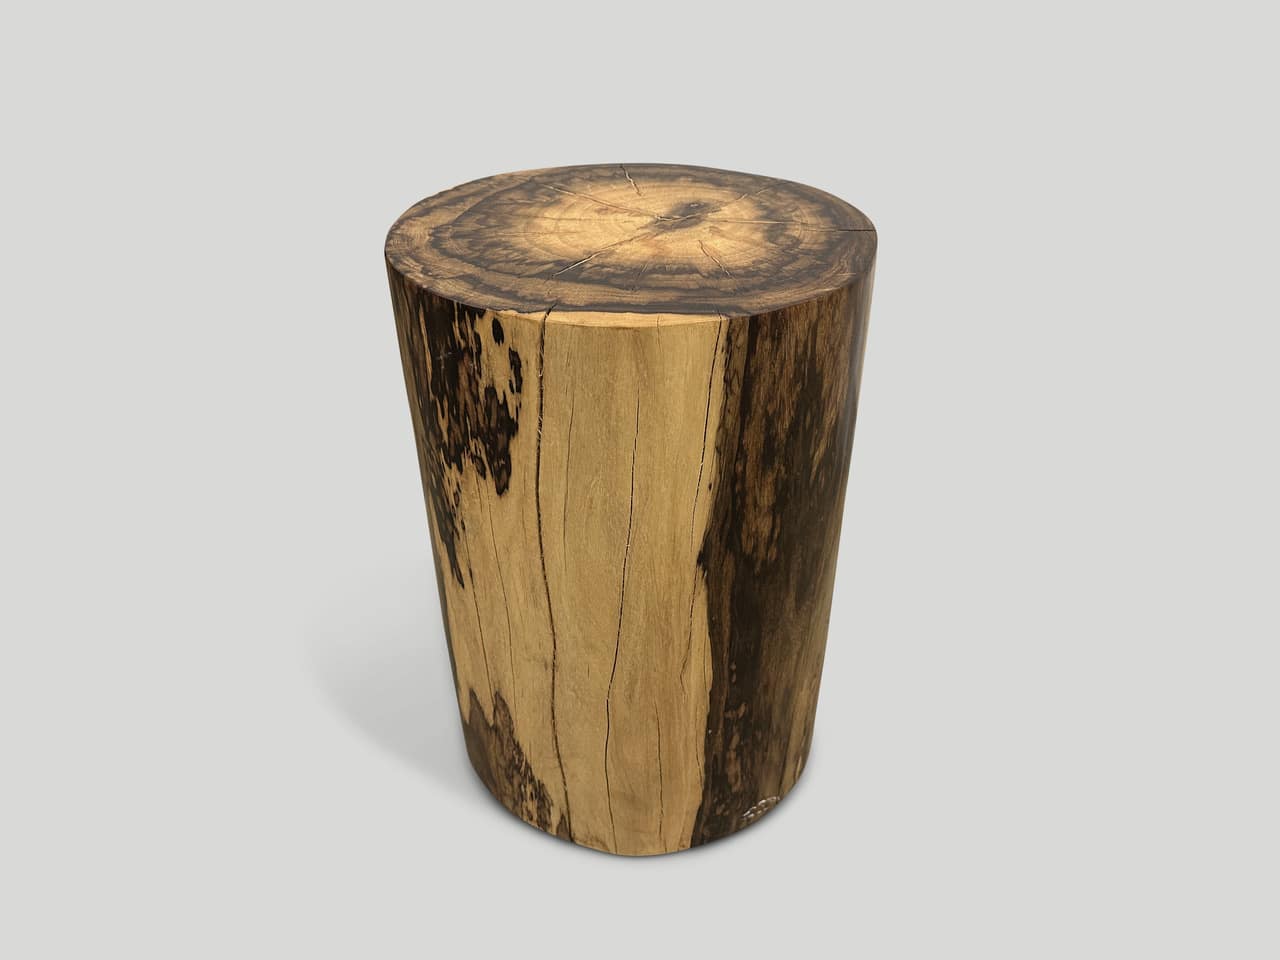 rosewood side table